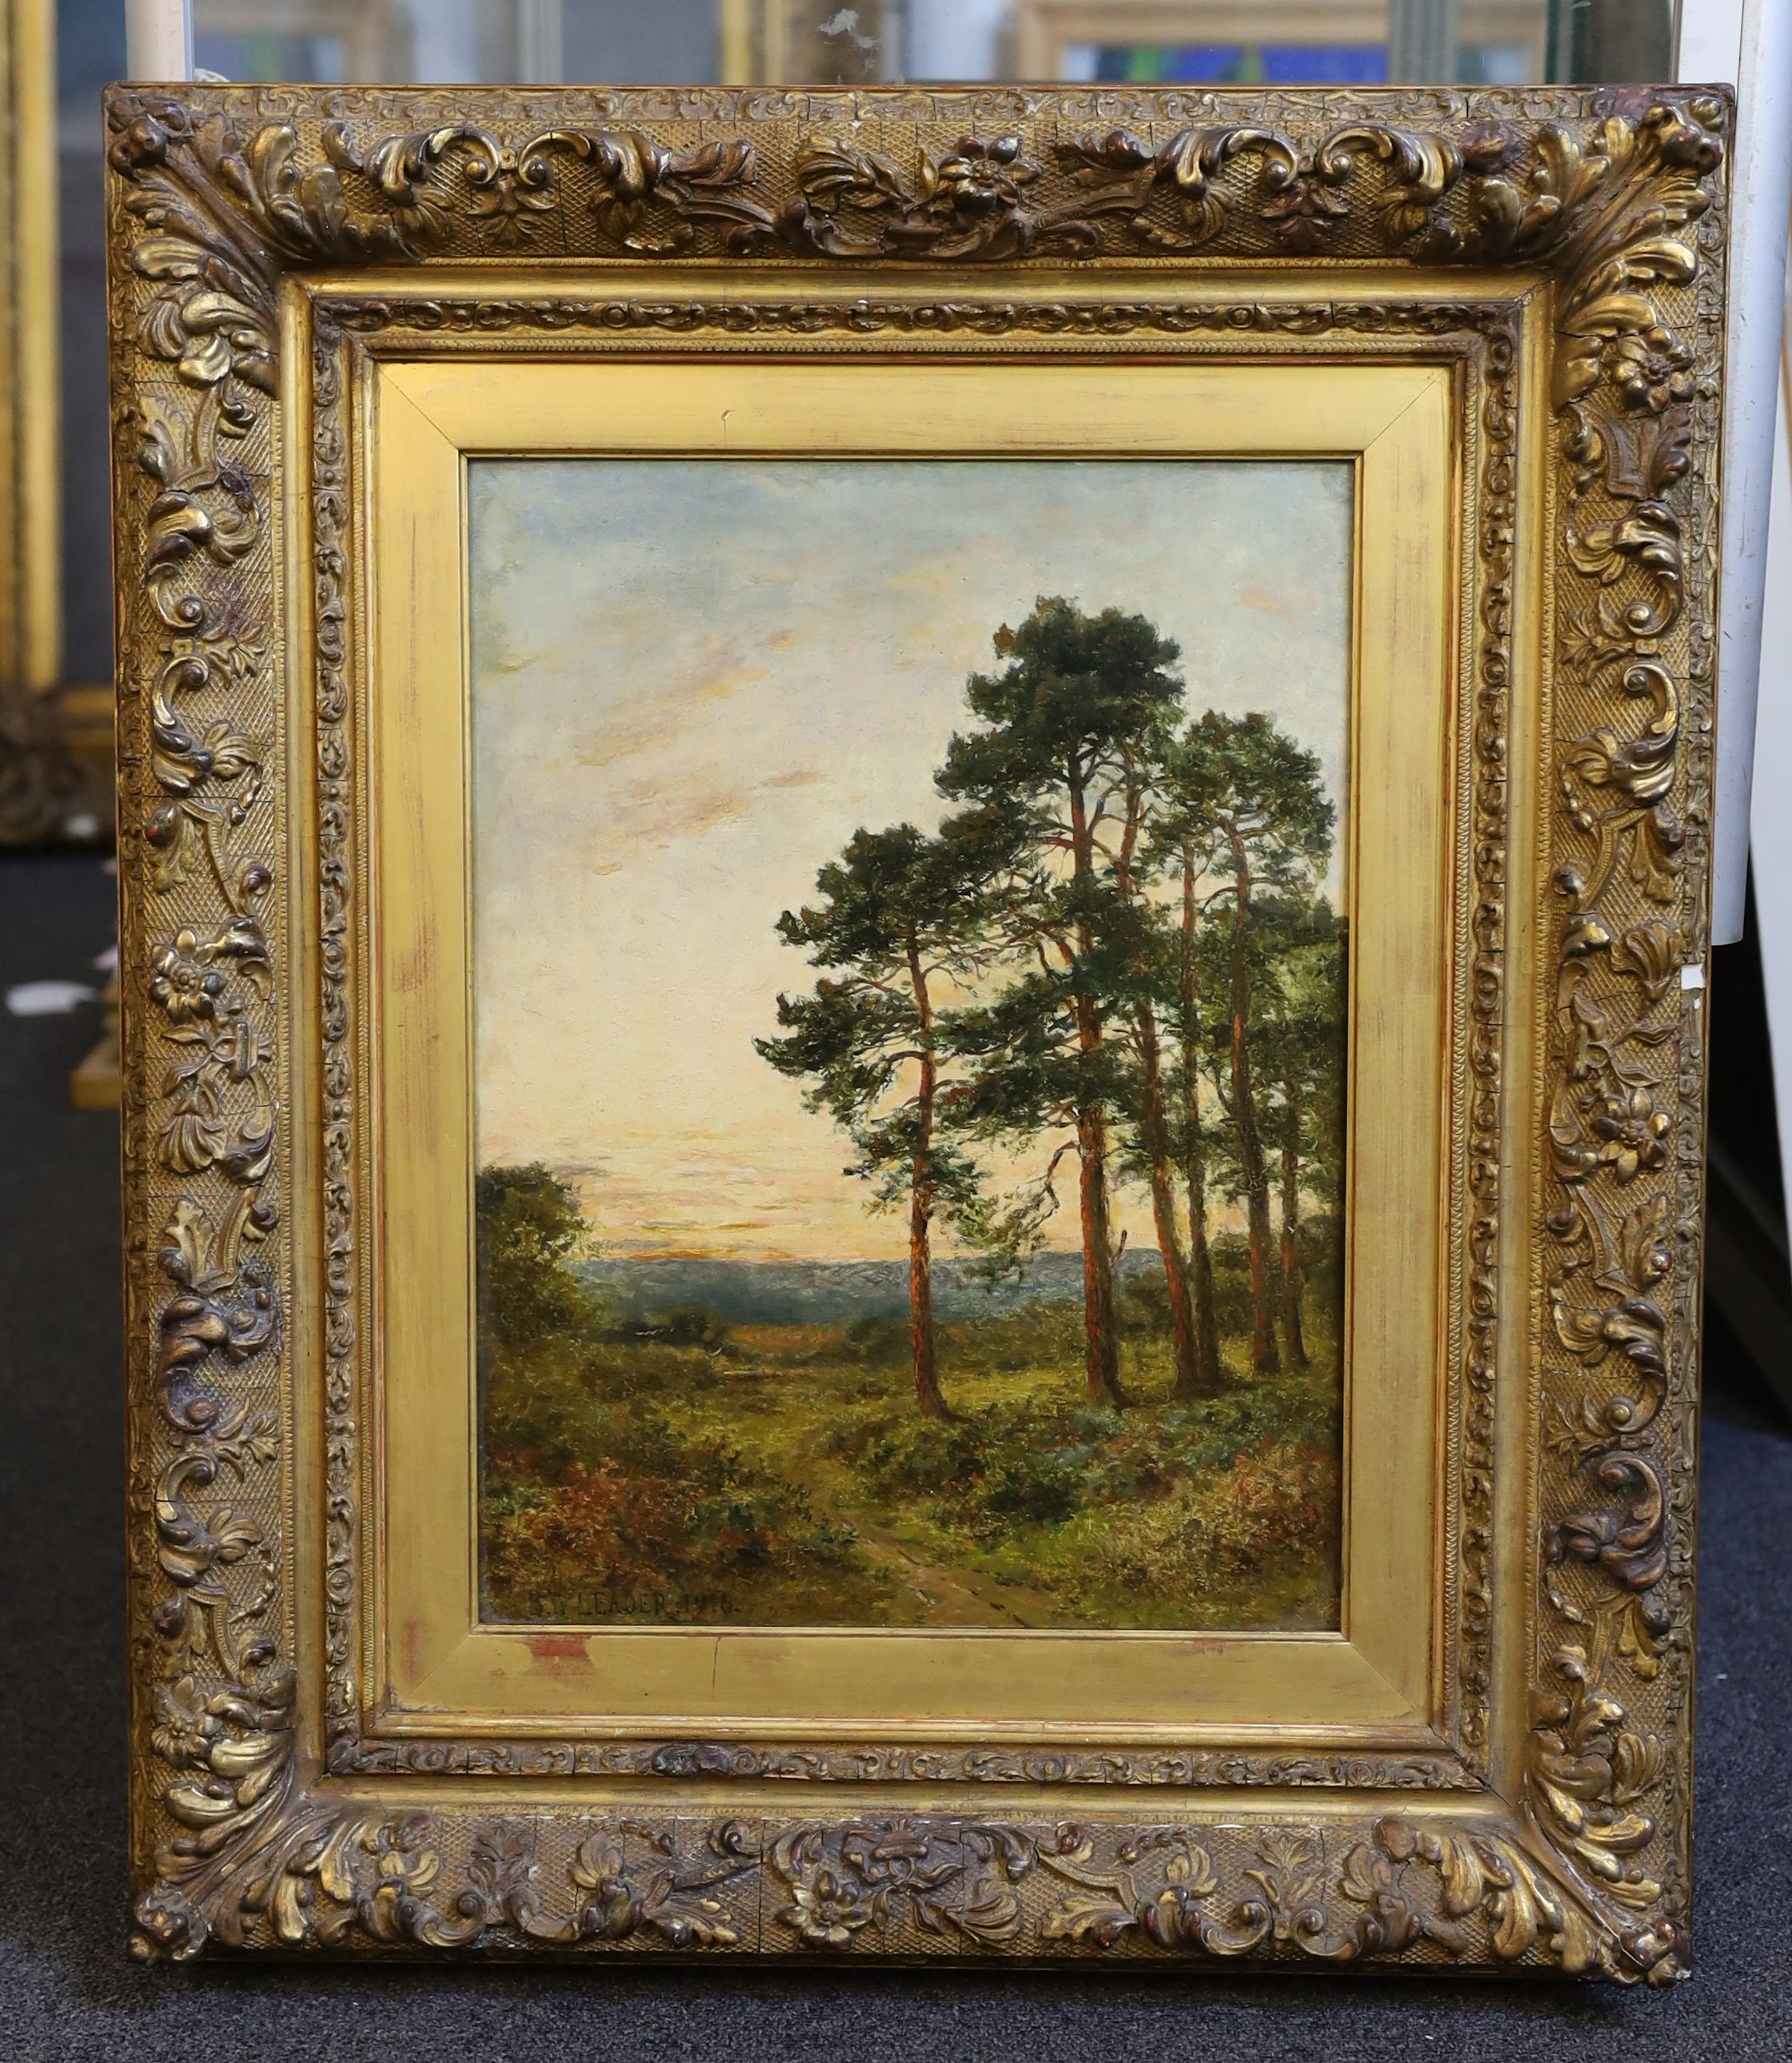 Benjamin Williams Leader (1831-1923), Landscape at sunset with pine trees, Oil on board, 42 x 32cm.